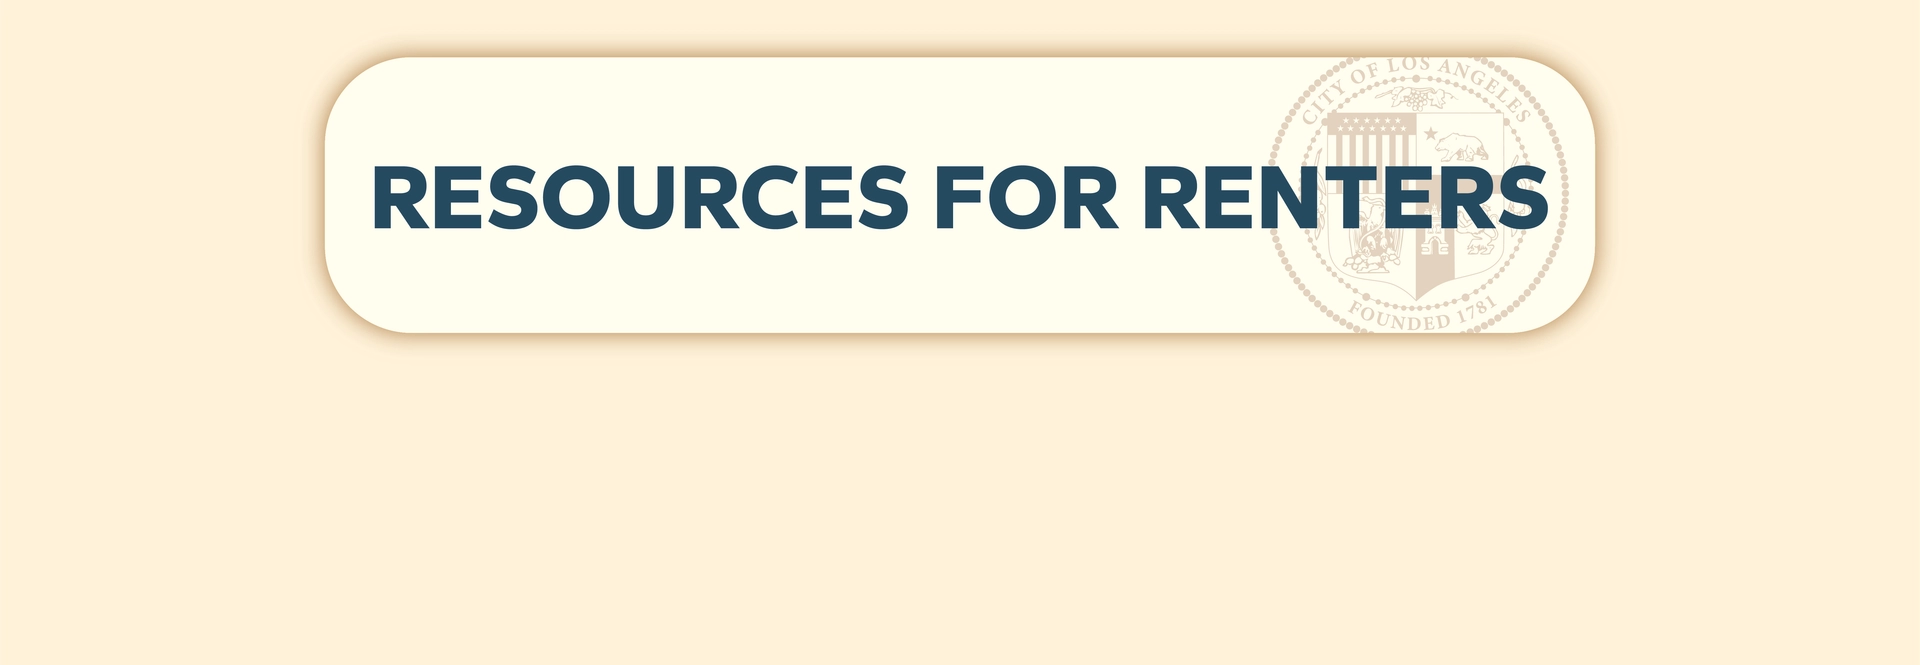 resources for renters